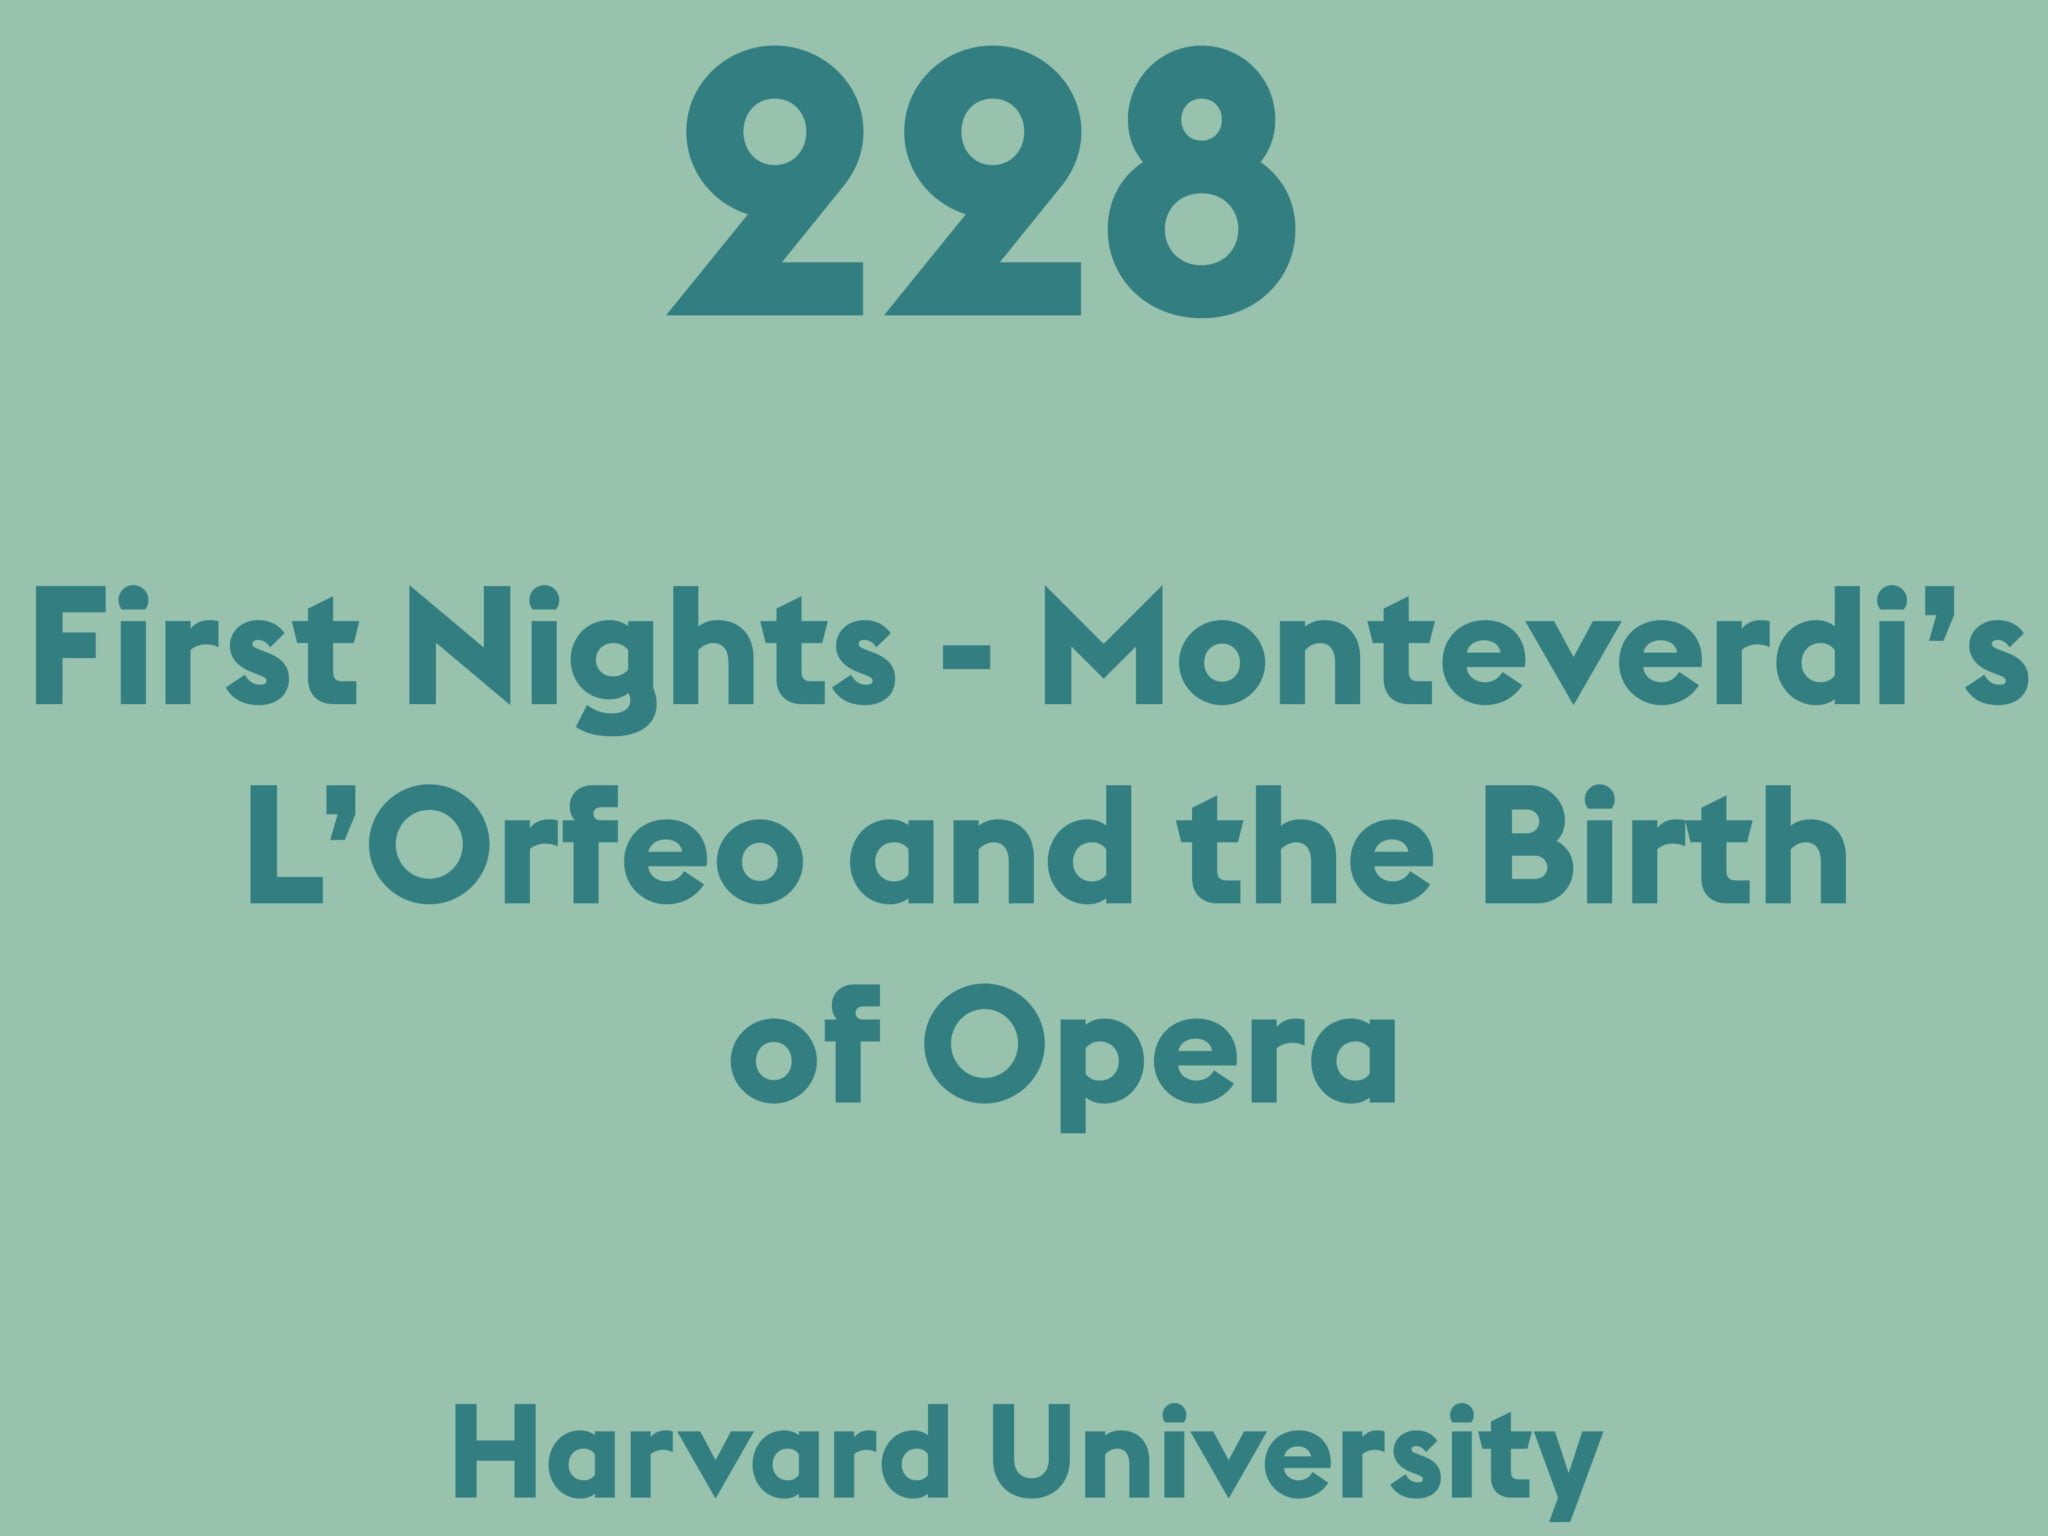 First Nights - Monteverdi’s L’Orfeo and the Birth of Opera